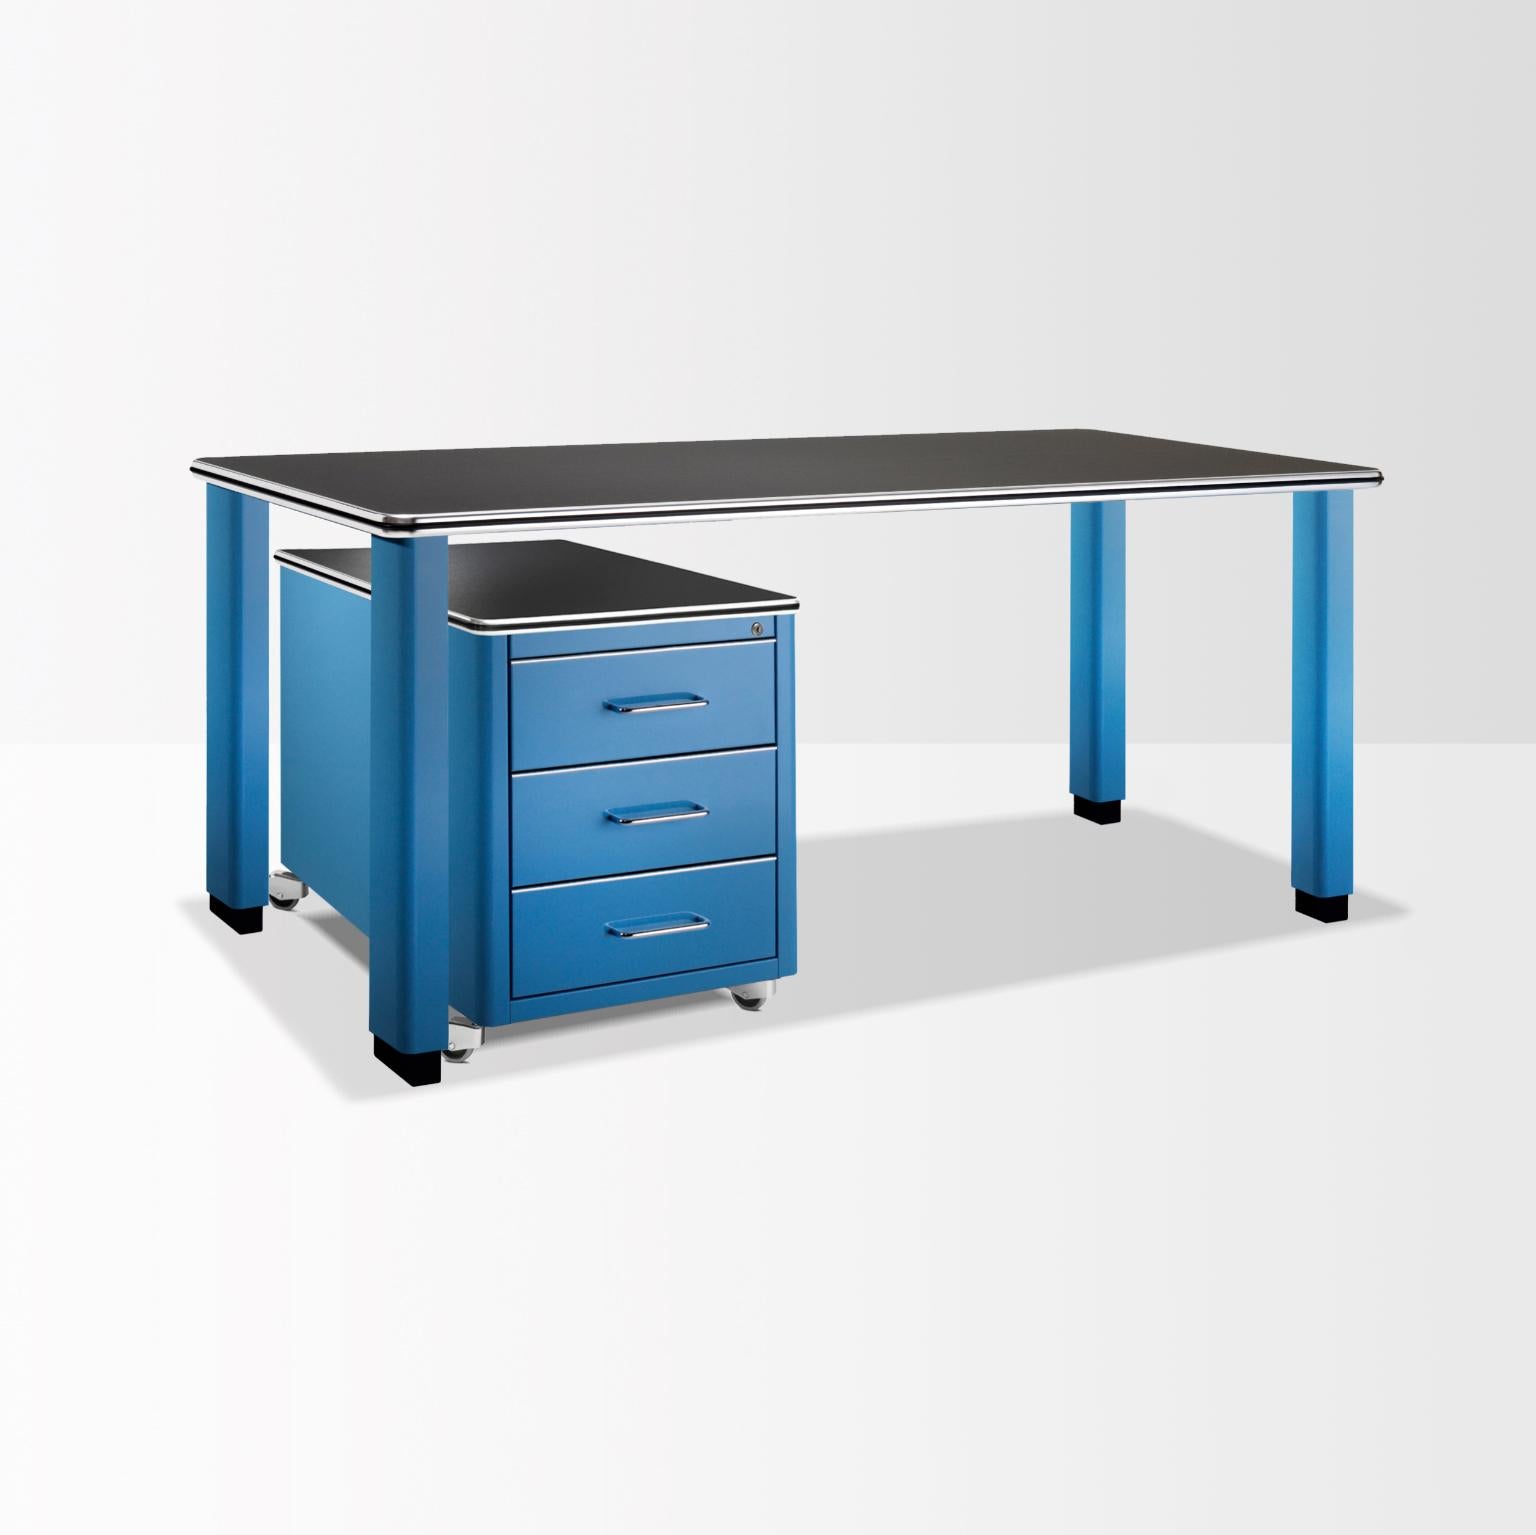 Executive metal desk in classical industrial design style. The timeless essential form of the desk with rolling cart / trolley, creates a clear and distinctive workplace adapted for different interior situations. The desktop can be covered on choice